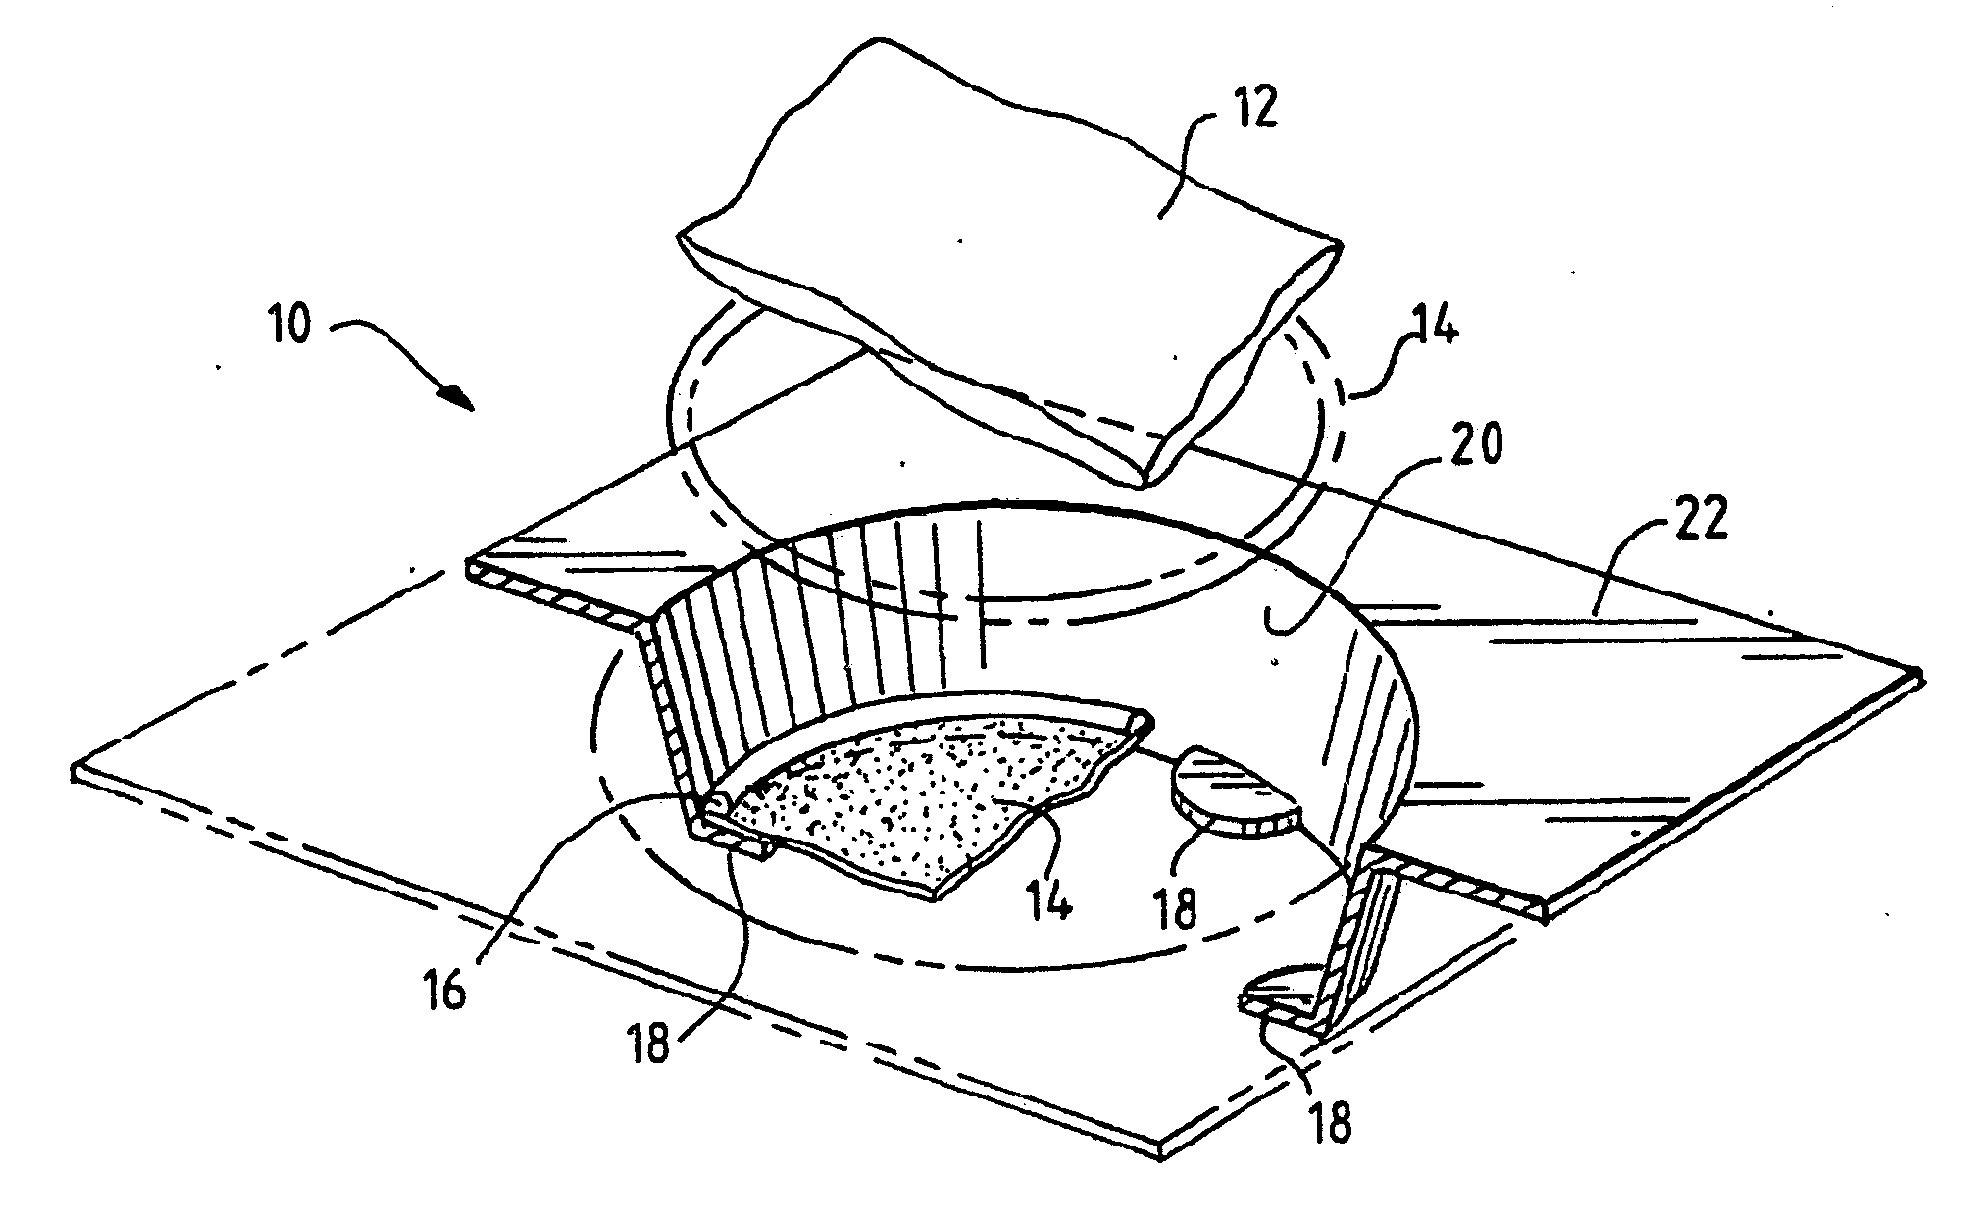 Basket for holding coffee grounds in coffee brewing machine